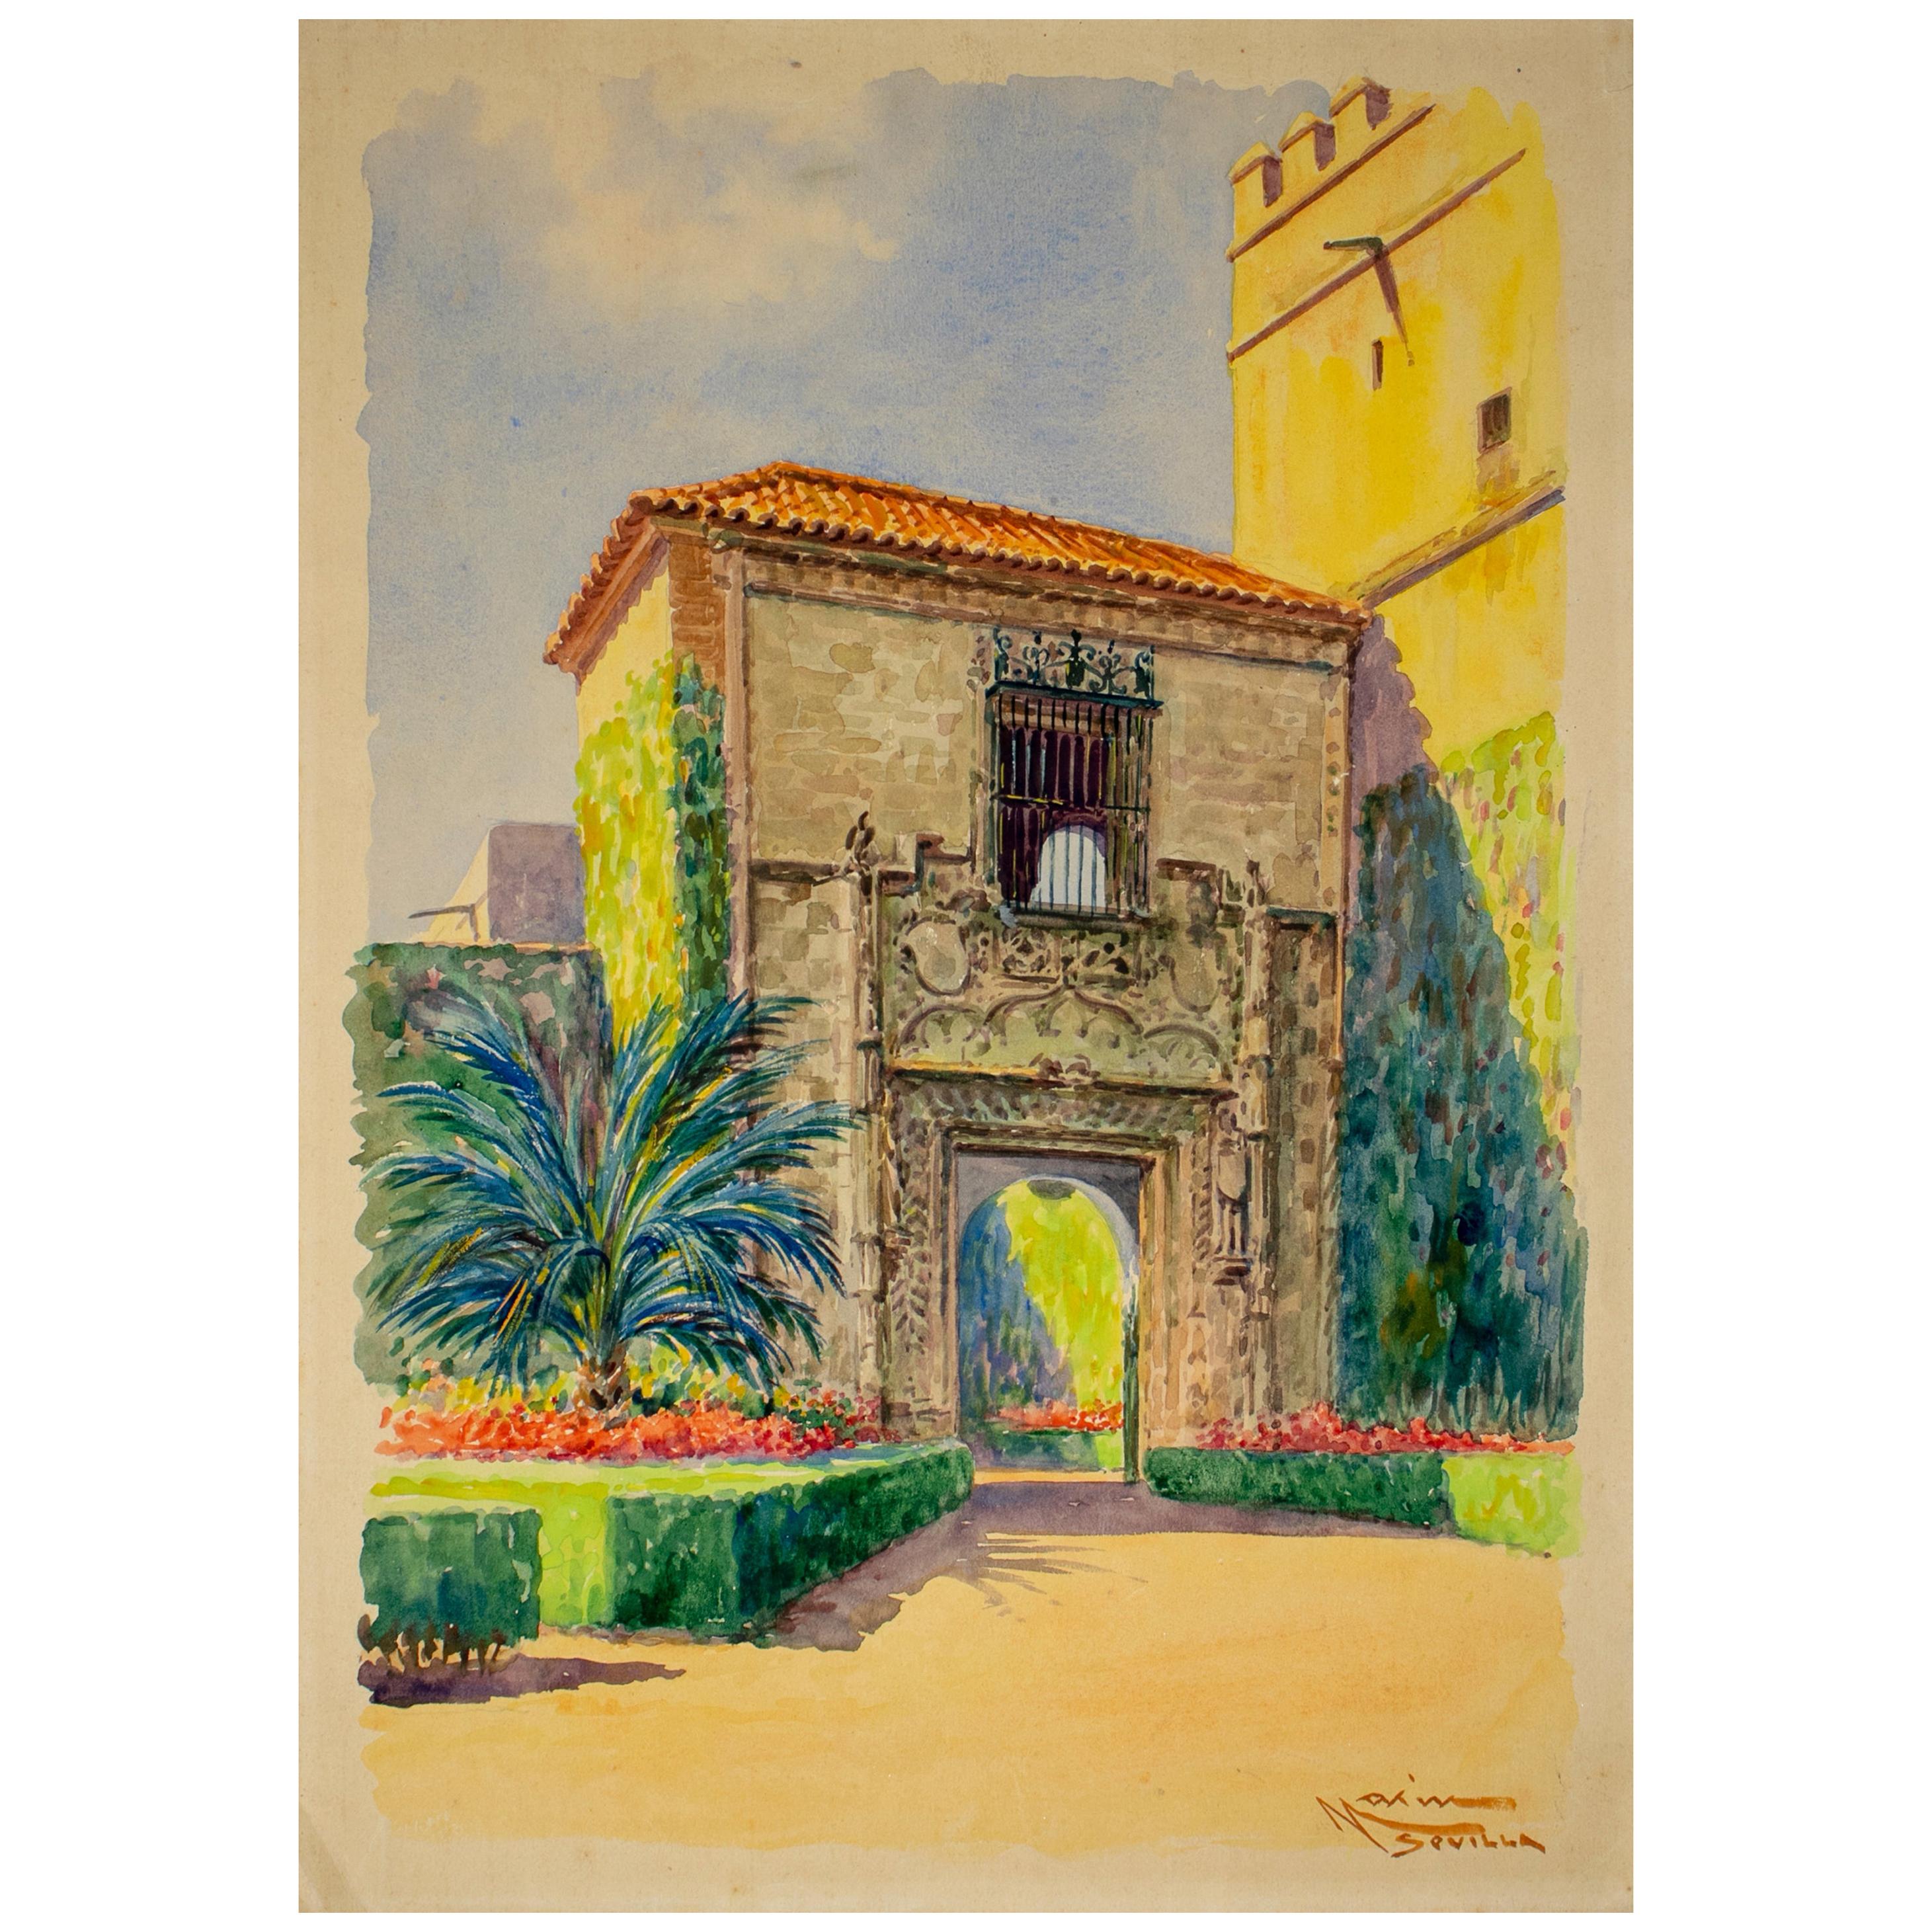 1920s Spanish Watercolor Drawing of the Royal Alcazar of Seville Palace Door